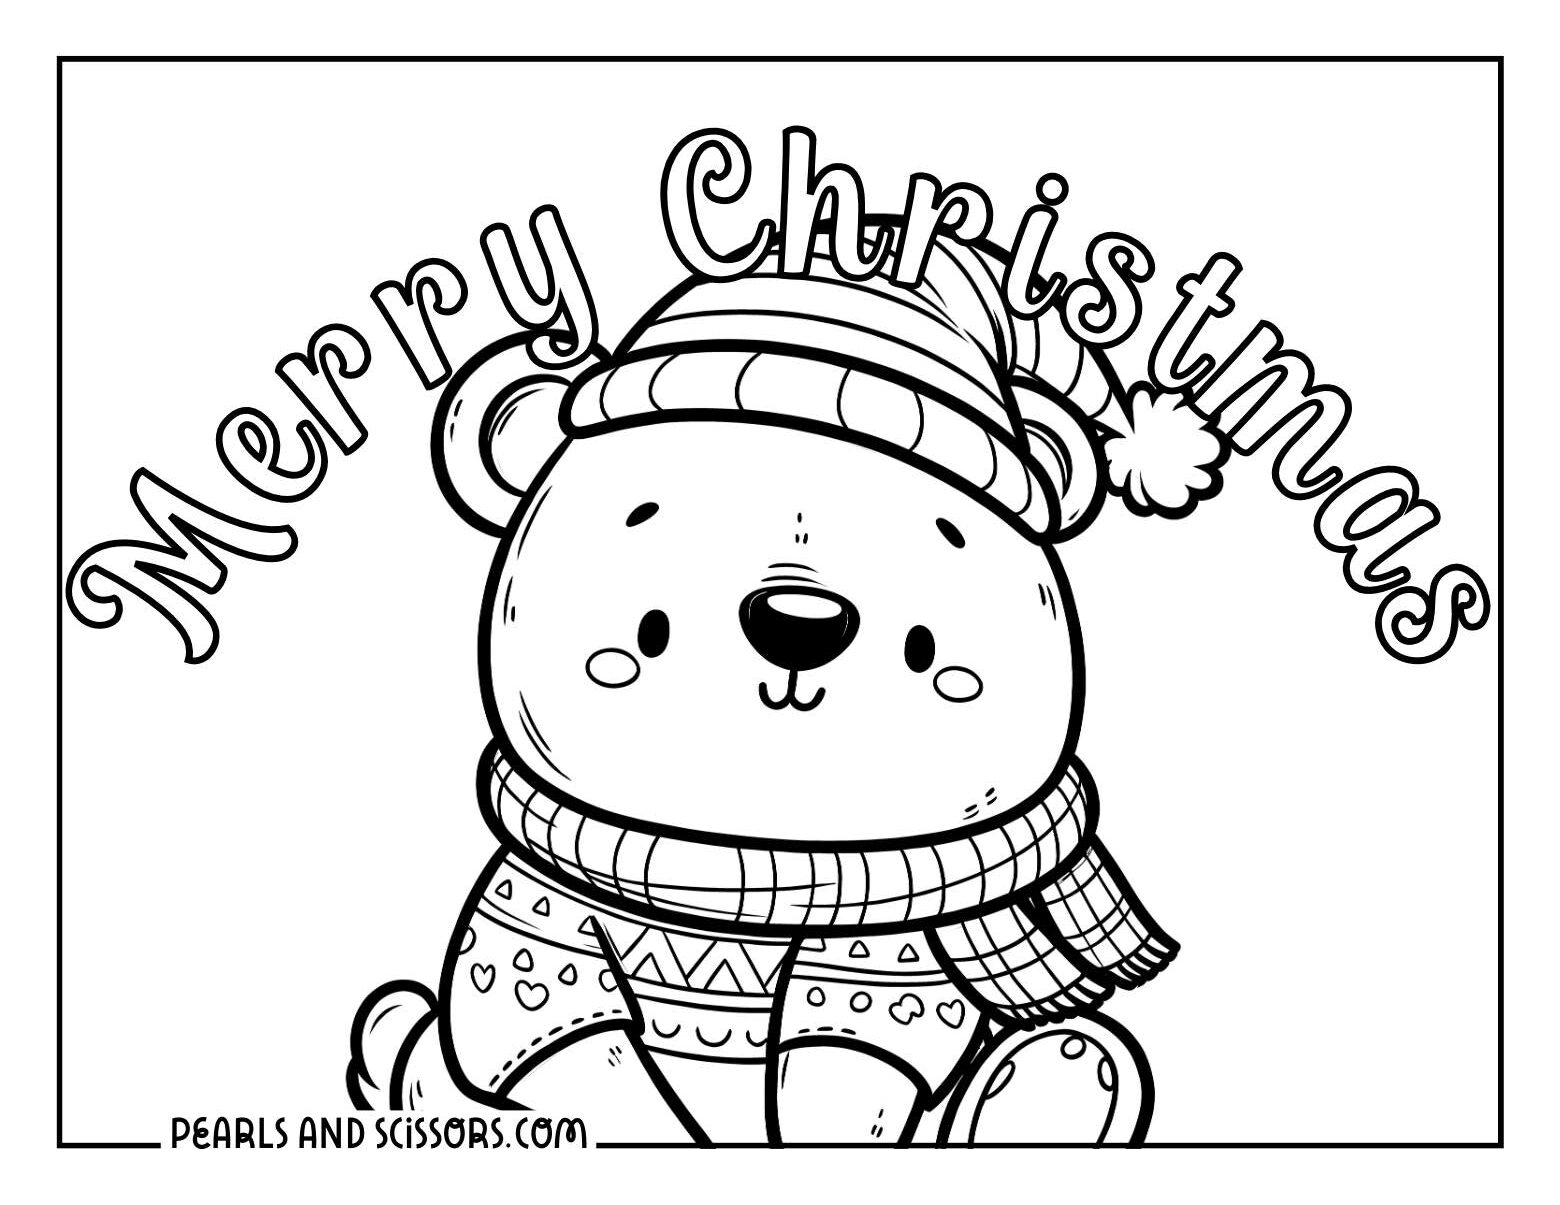 Kawaii polar bear wearing a santa hat and scarf merry christmas coloring page for kids.